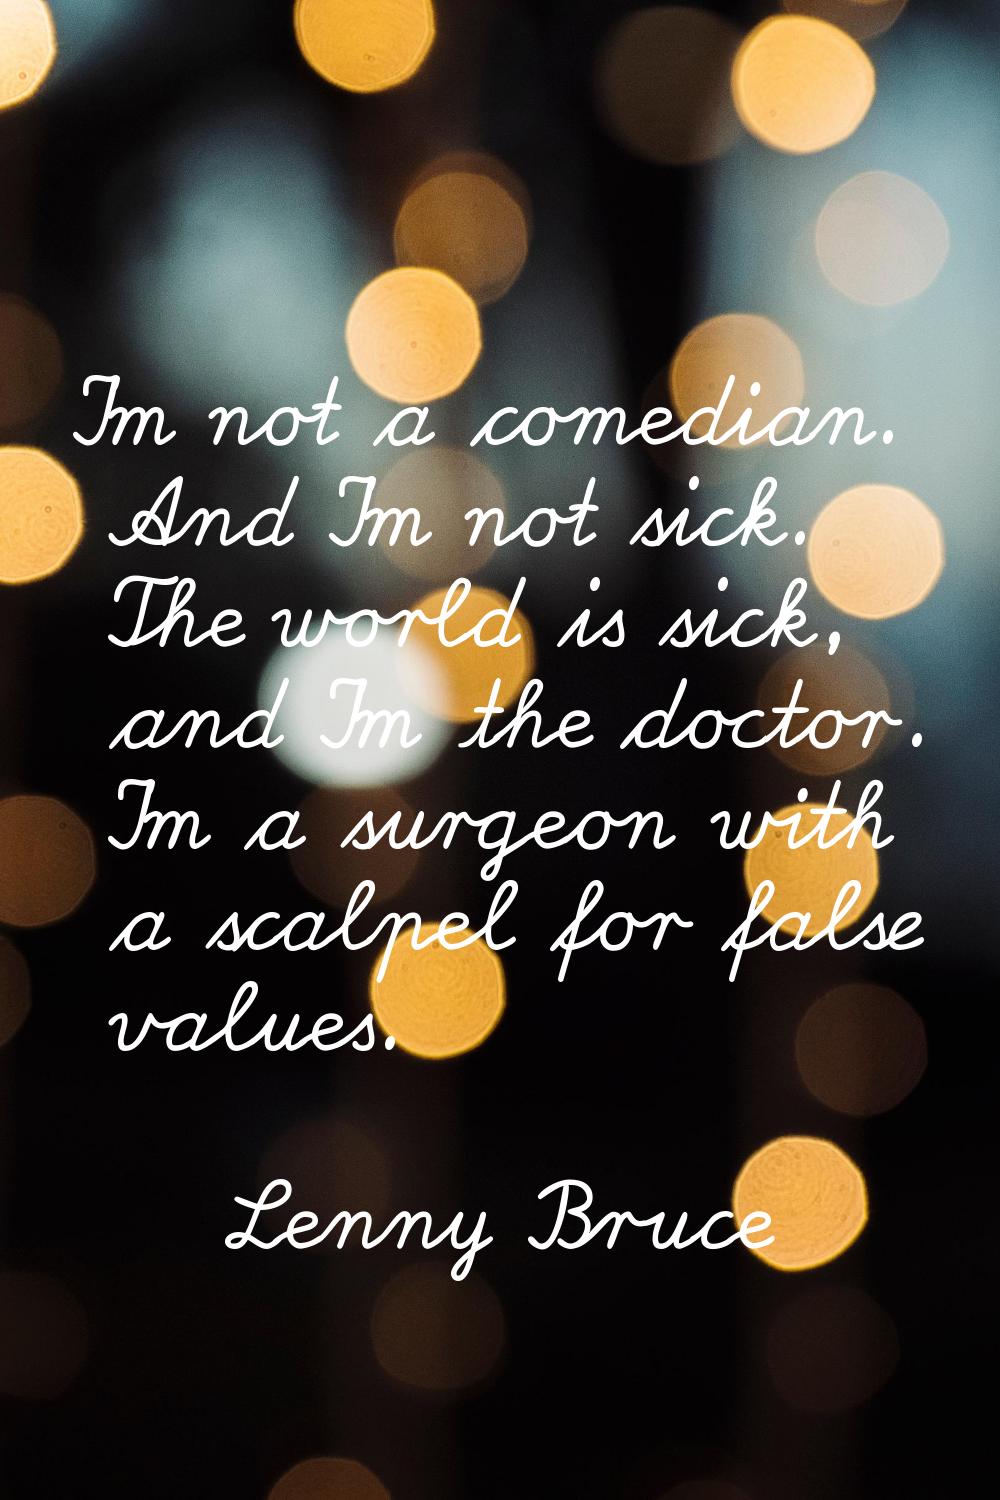 I'm not a comedian. And I'm not sick. The world is sick, and I'm the doctor. I'm a surgeon with a s